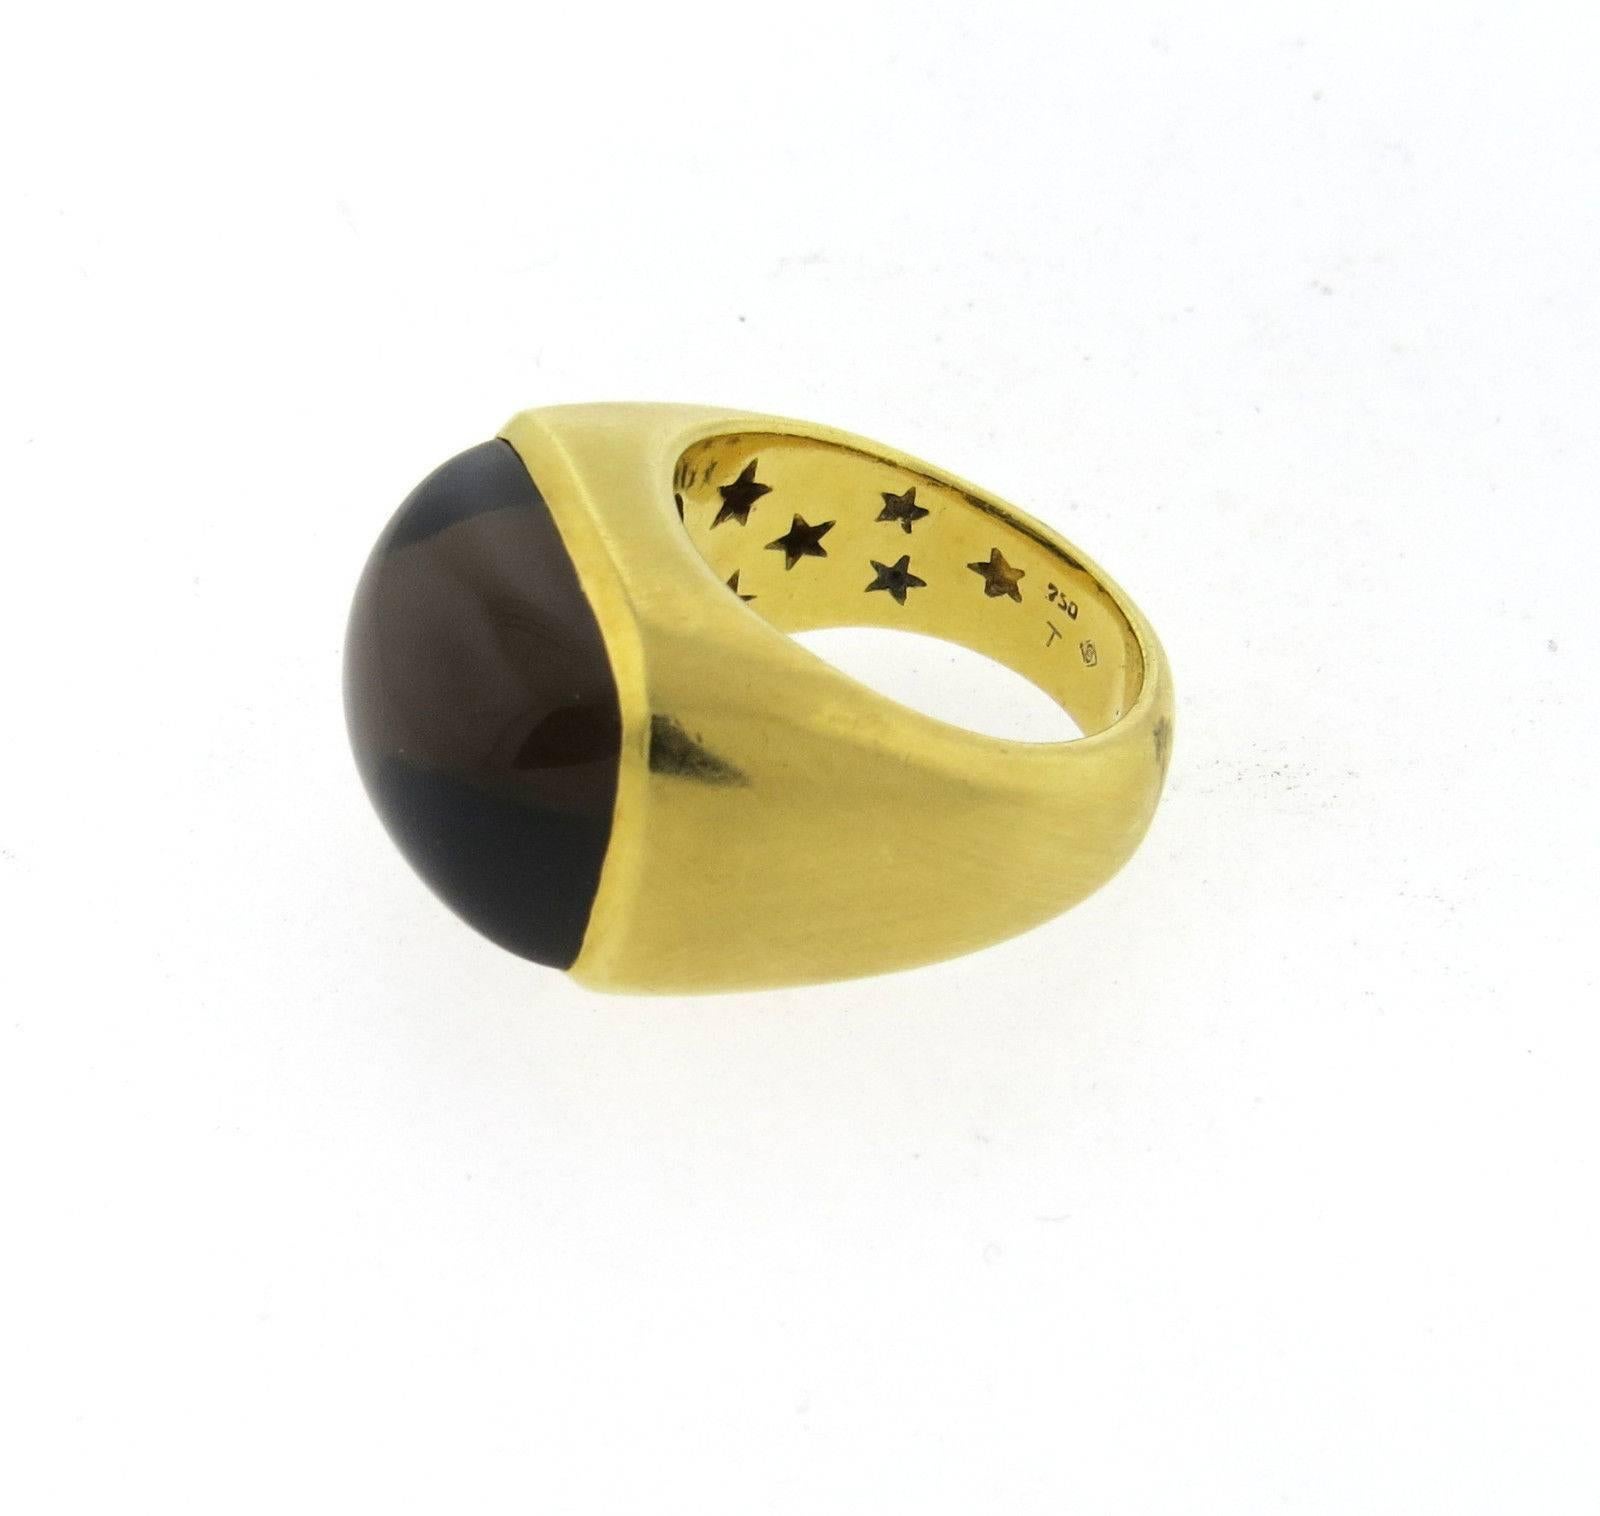 An Heavy 18k yellow gold ring set with a smokey topaz measuring 14.8mm x 19.5mm and a diamond accent.  Crafted by H. Stern, the ring is a size 8 1/2, ring top is 16mm x 22mm.  Marked: 750, T, S mark, signature Stars.  The weight of the ring is 23.2